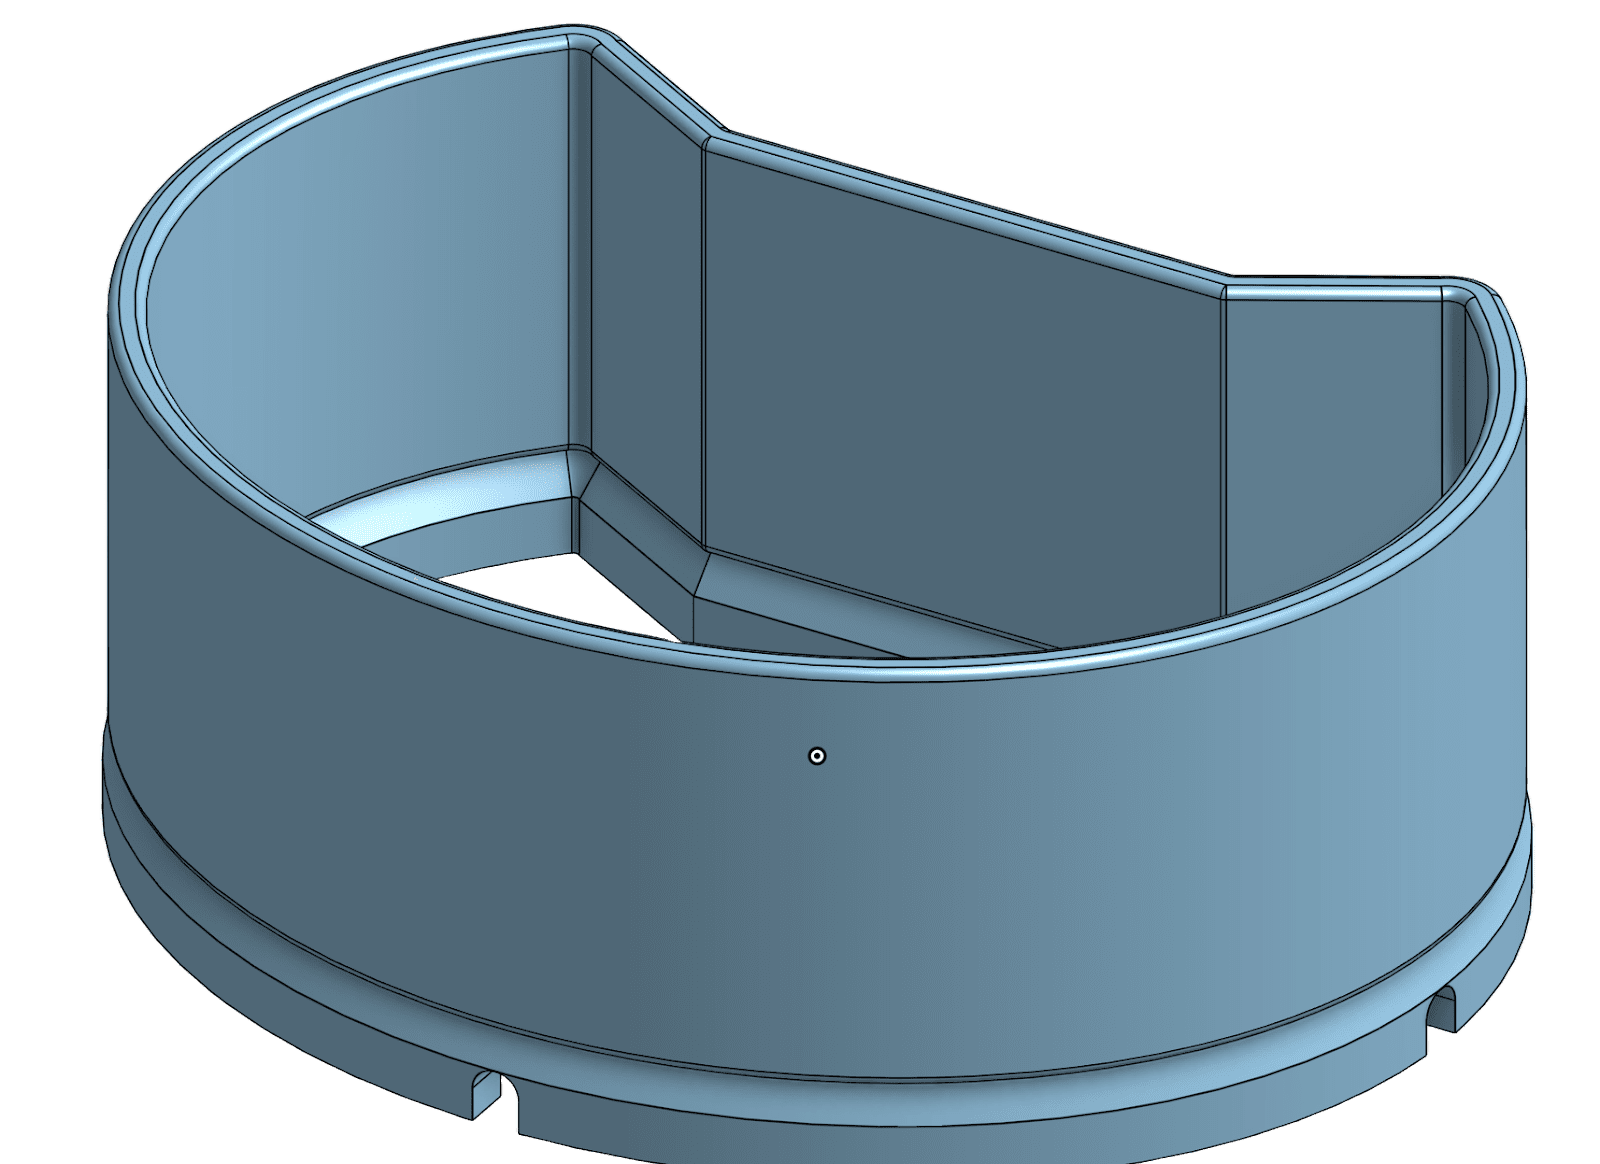 Watch band CAD design to be 3D printed with Formlabs Silicone 40A